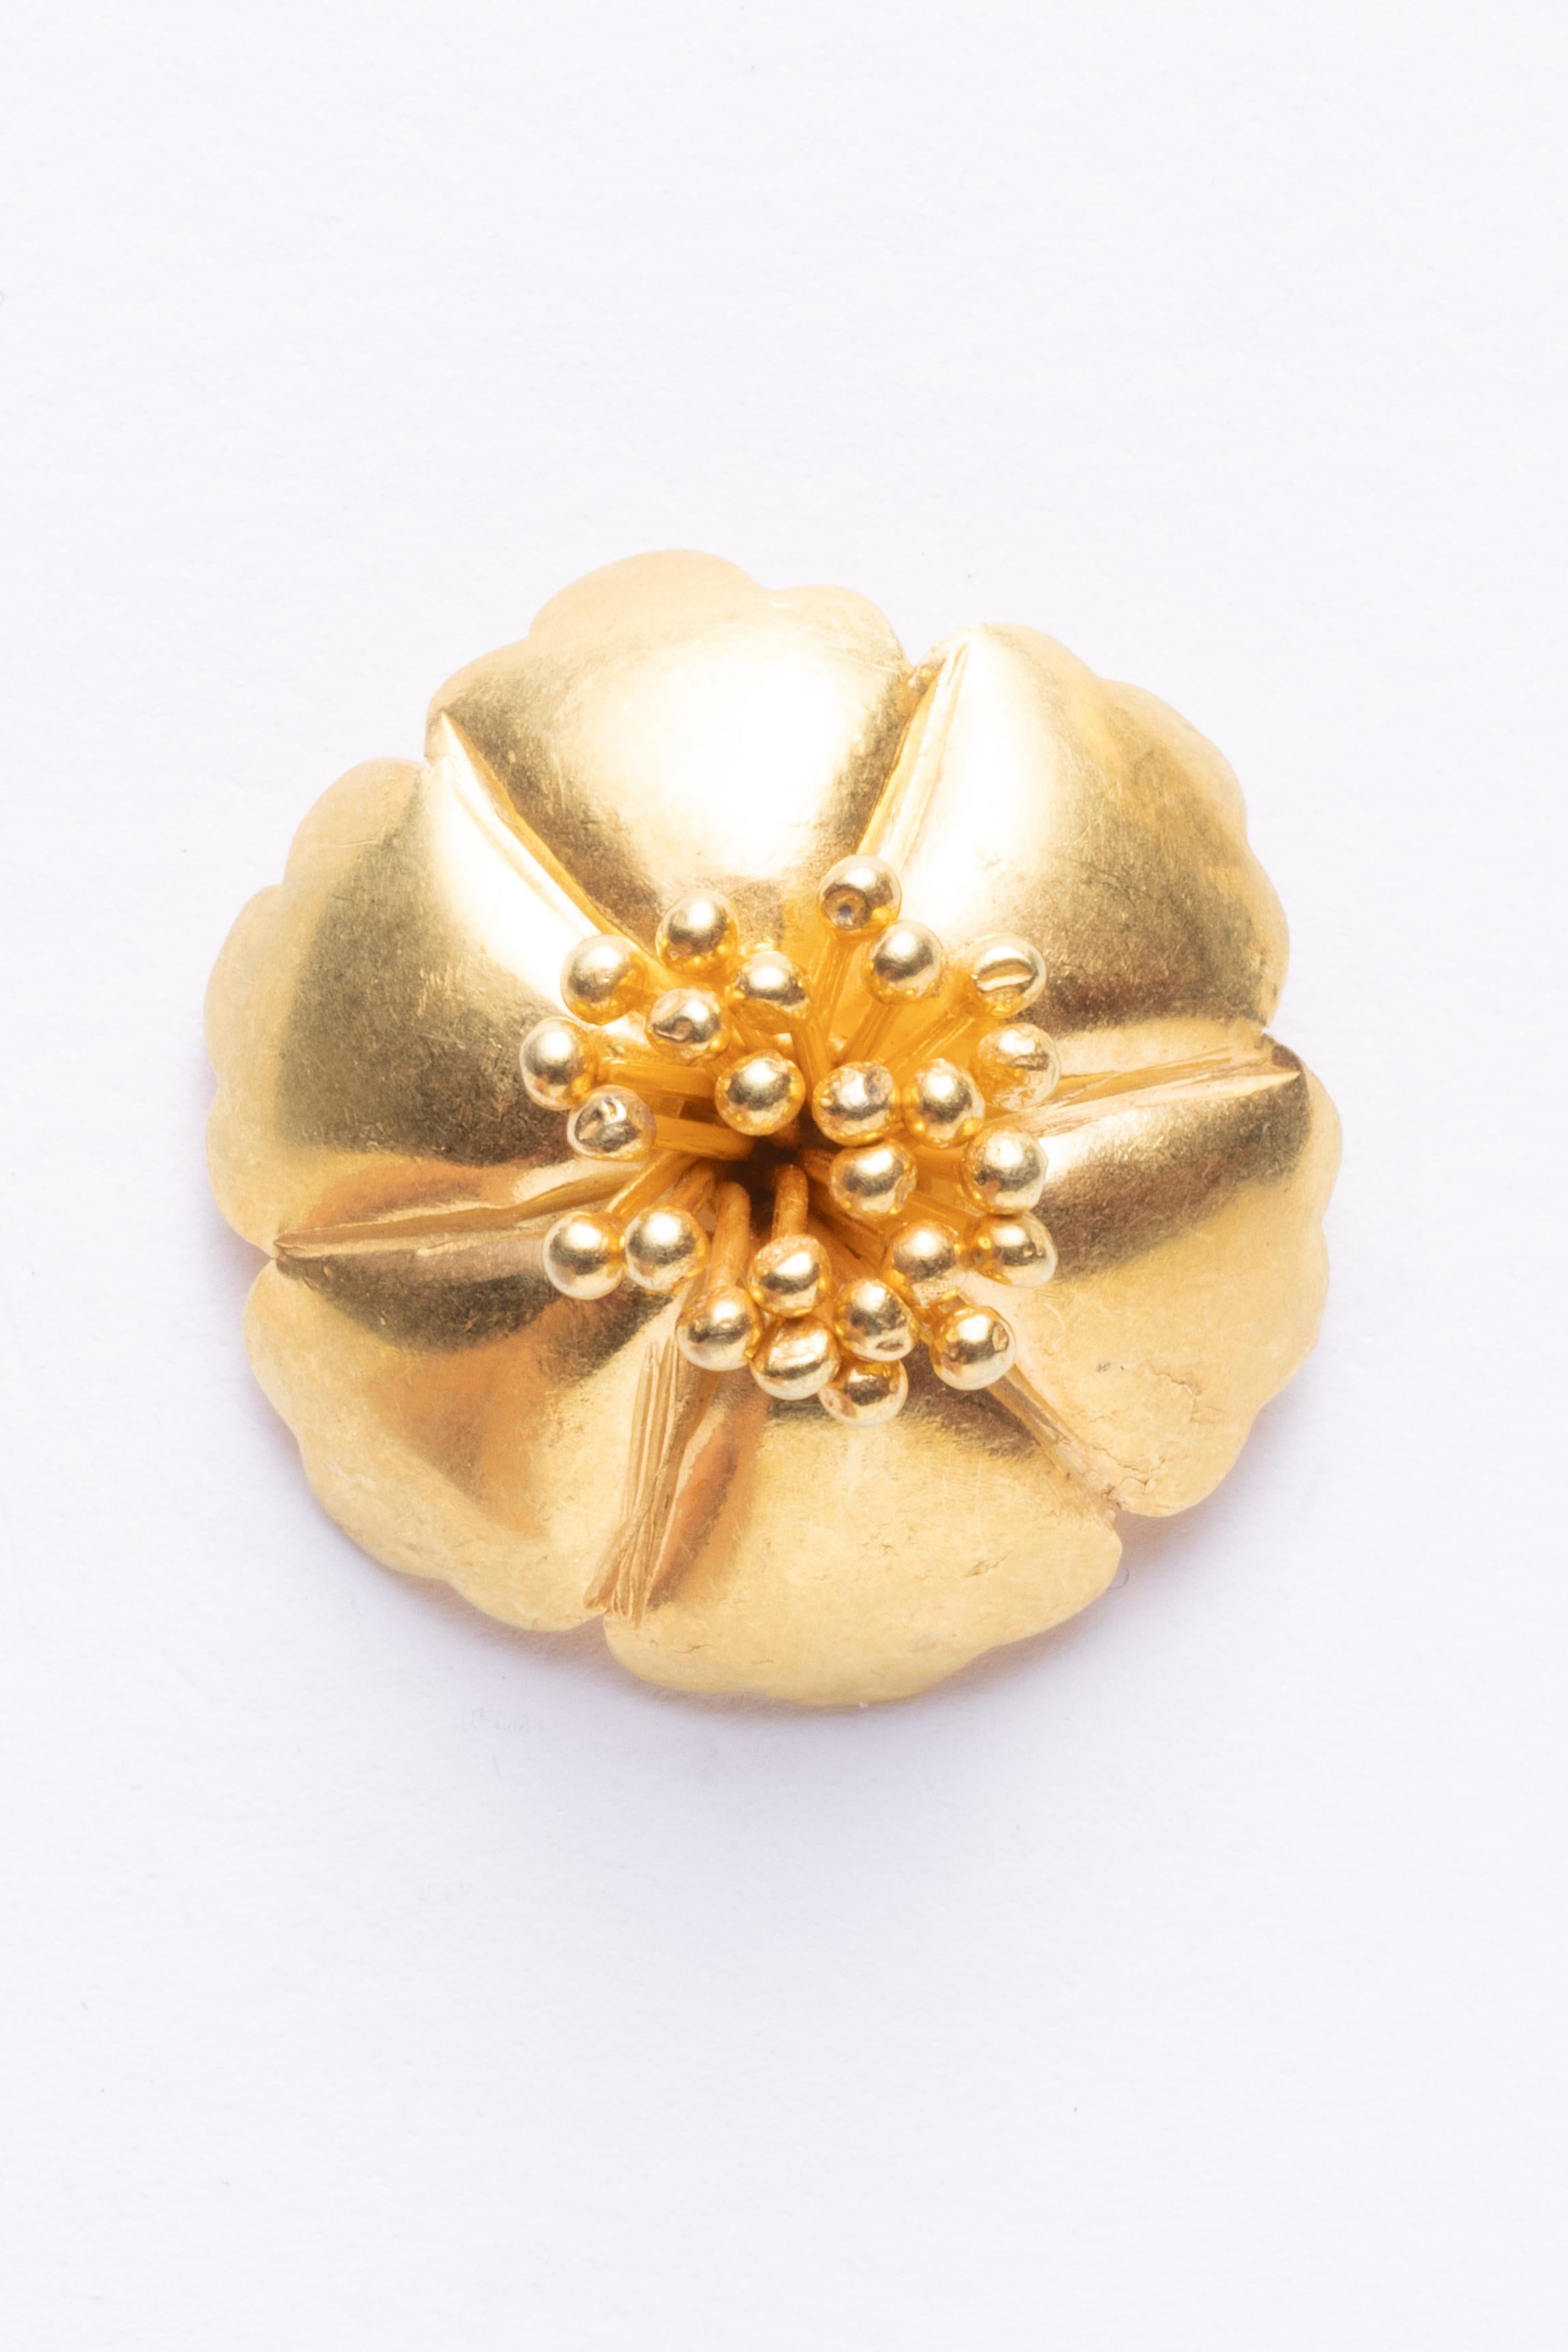 A pair of 18K gold button stud earrings in a floral motif.  The center features a cluster of textural and dimensional flower stamens.  18K gold posts for pierced ears.